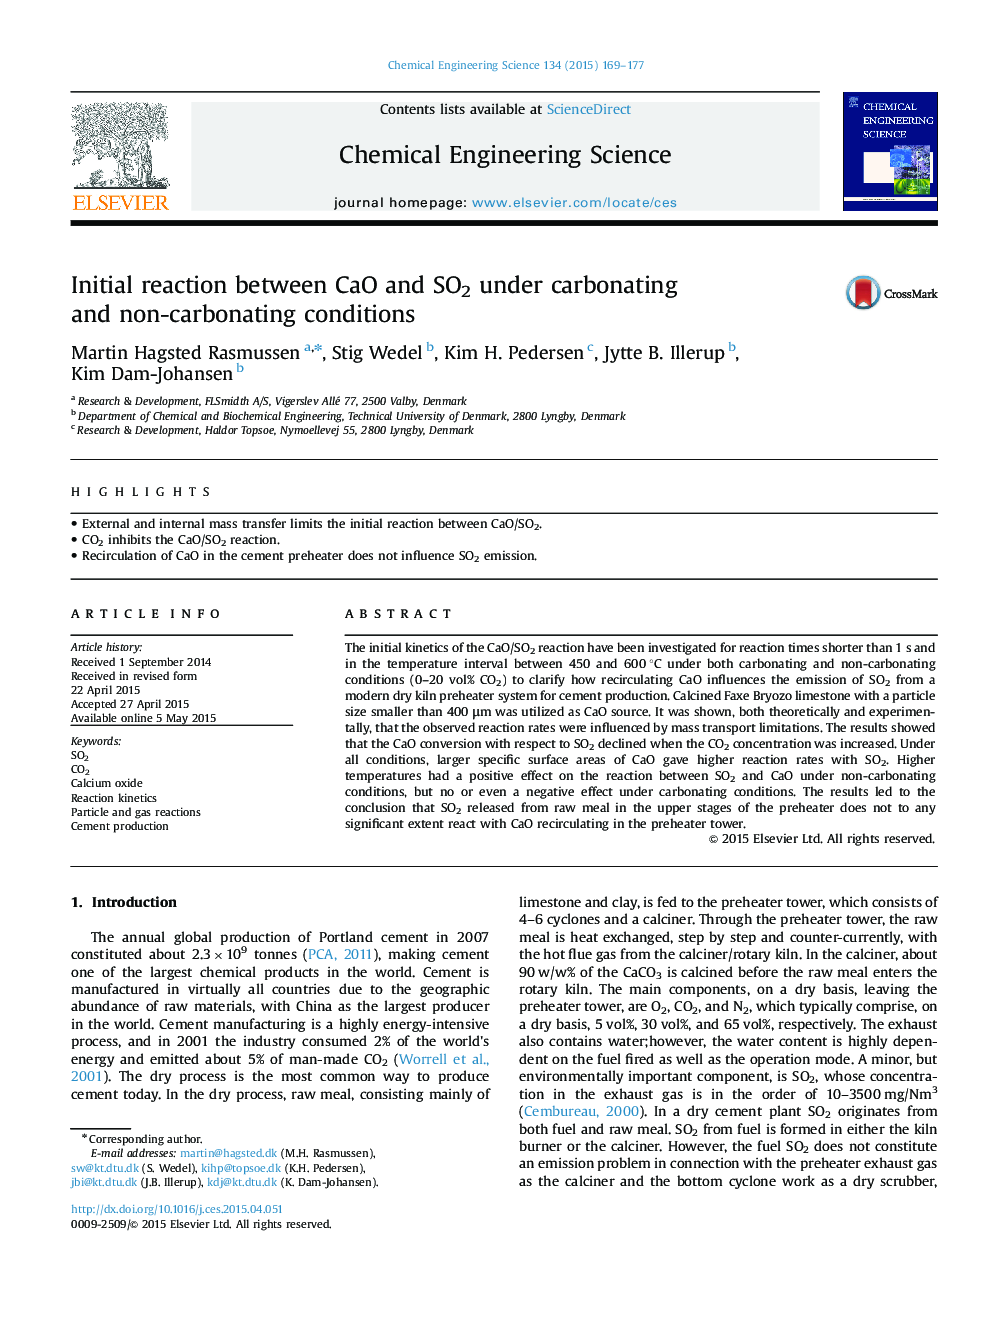 Initial reaction between CaO and SO2 under carbonating and non-carbonating conditions